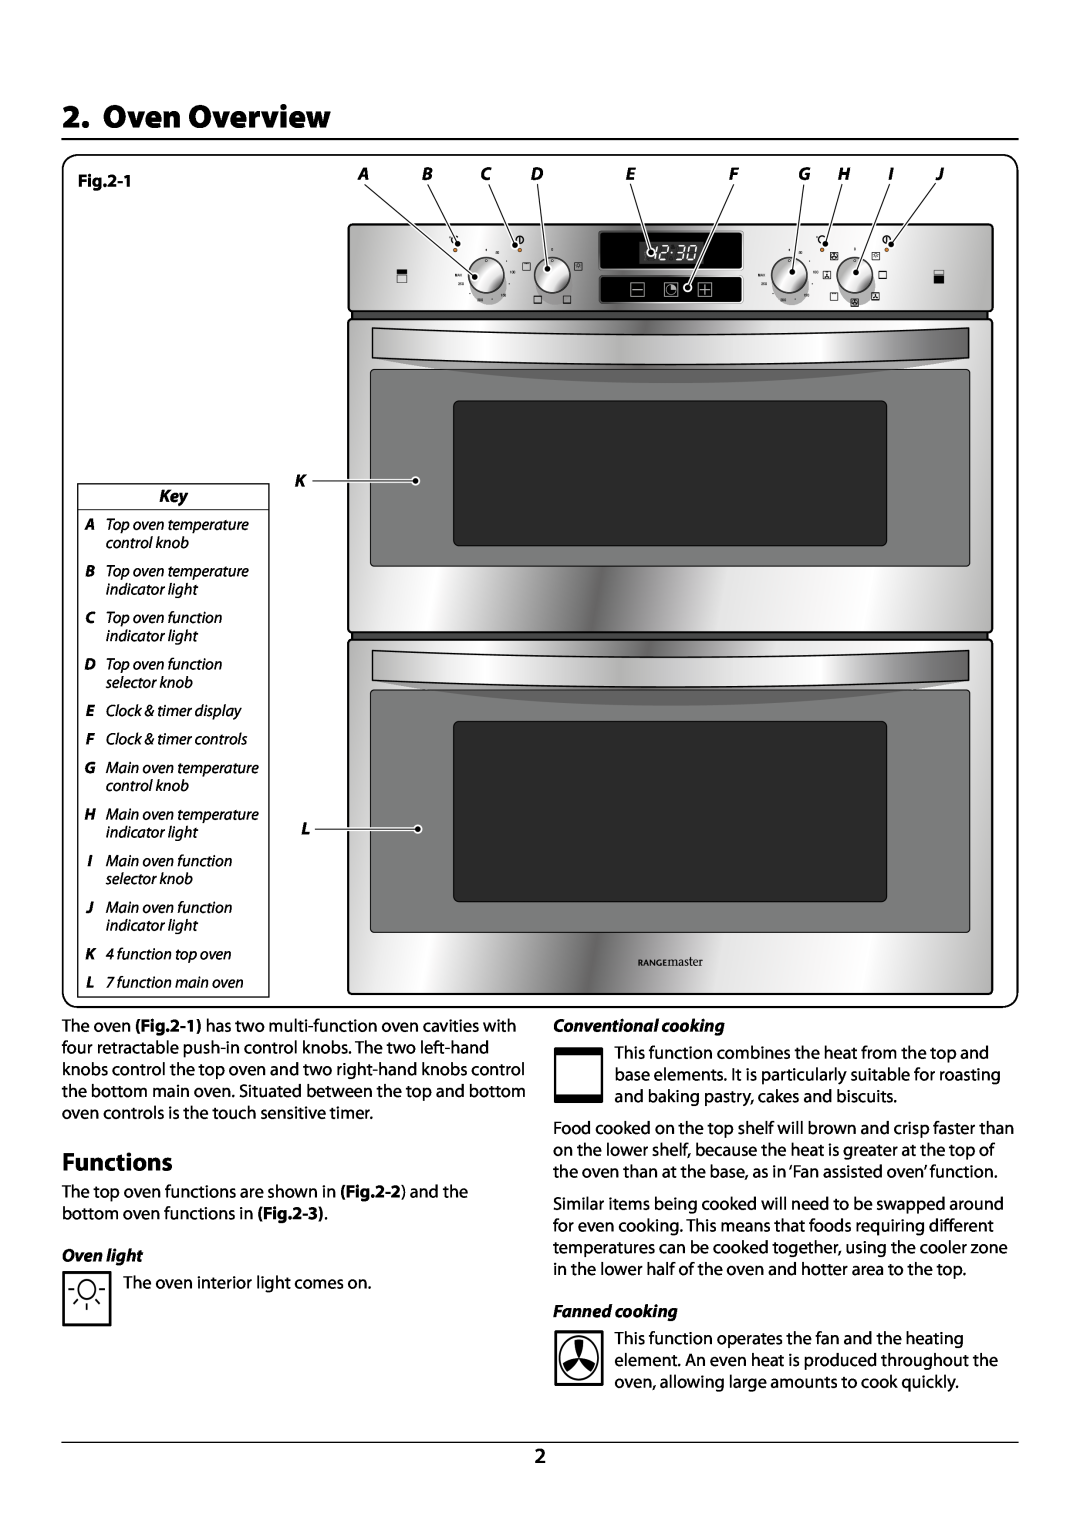 Rangemaster manual Oven Overview, Functions, DocNo.024-0006- Overview - R7247 oven, Oven light, Conventional cooking 